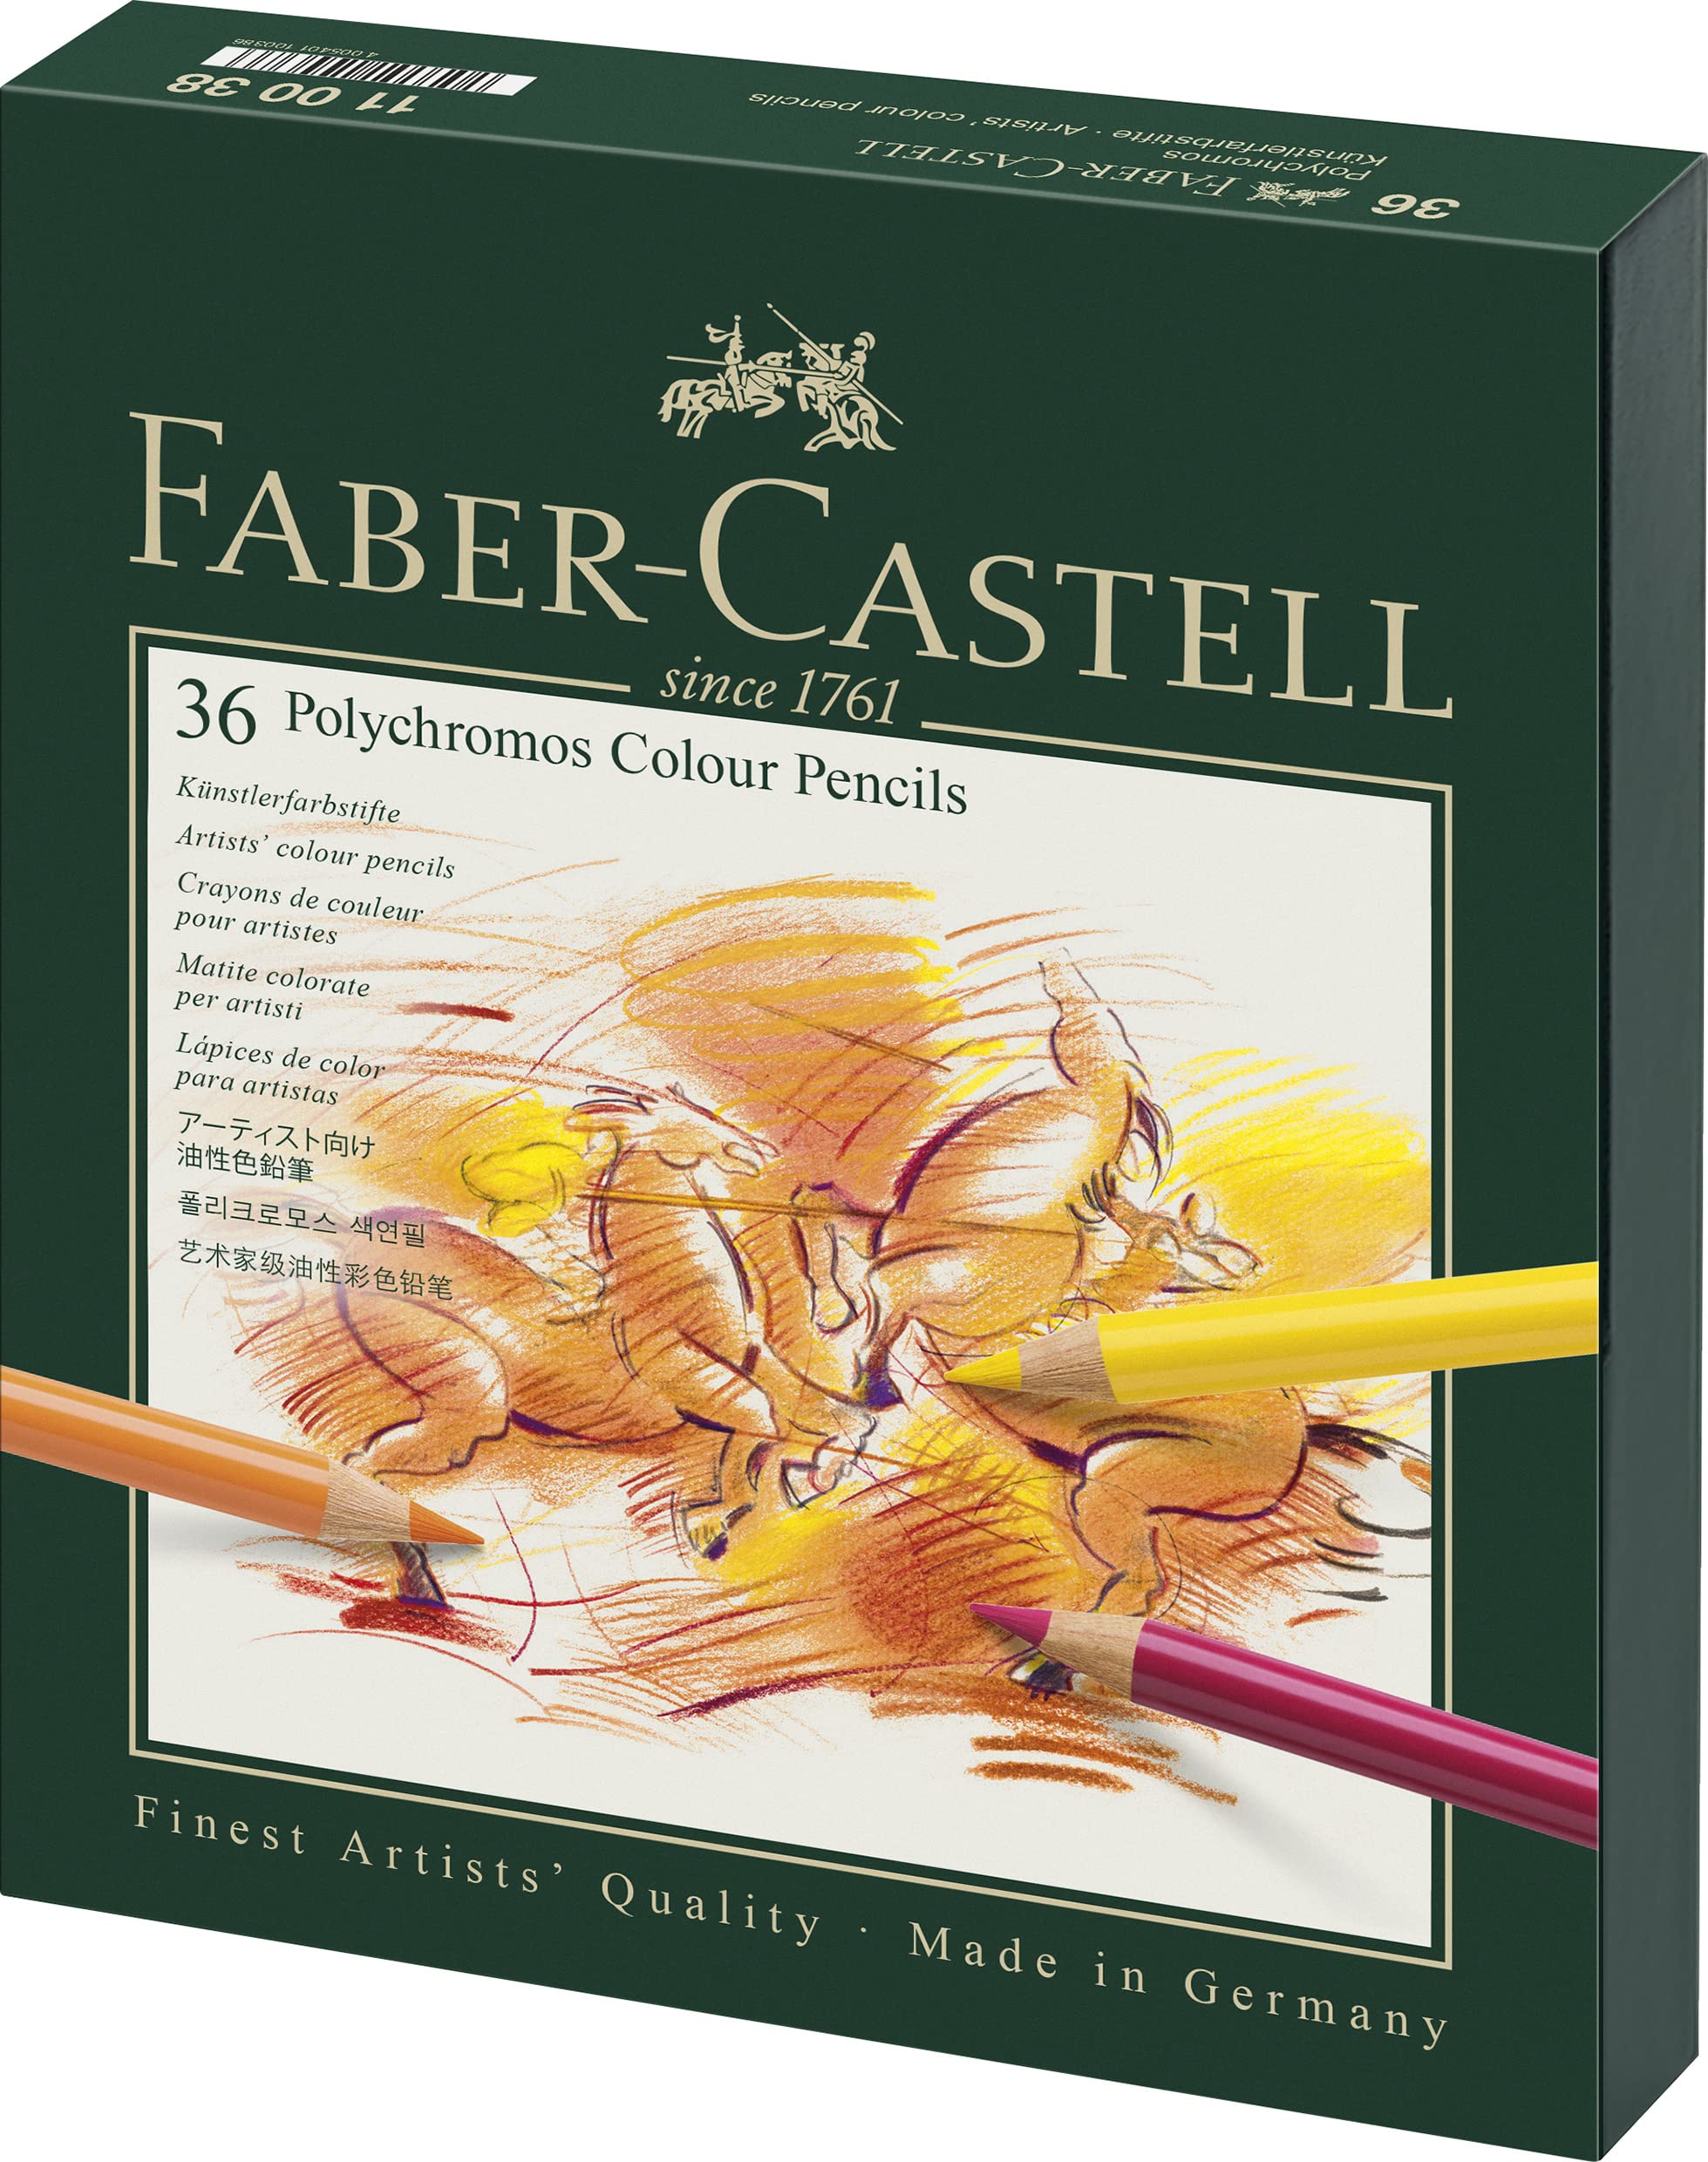 Faber-Castell Polychromos colored pencils review – Veronica Winters Painting